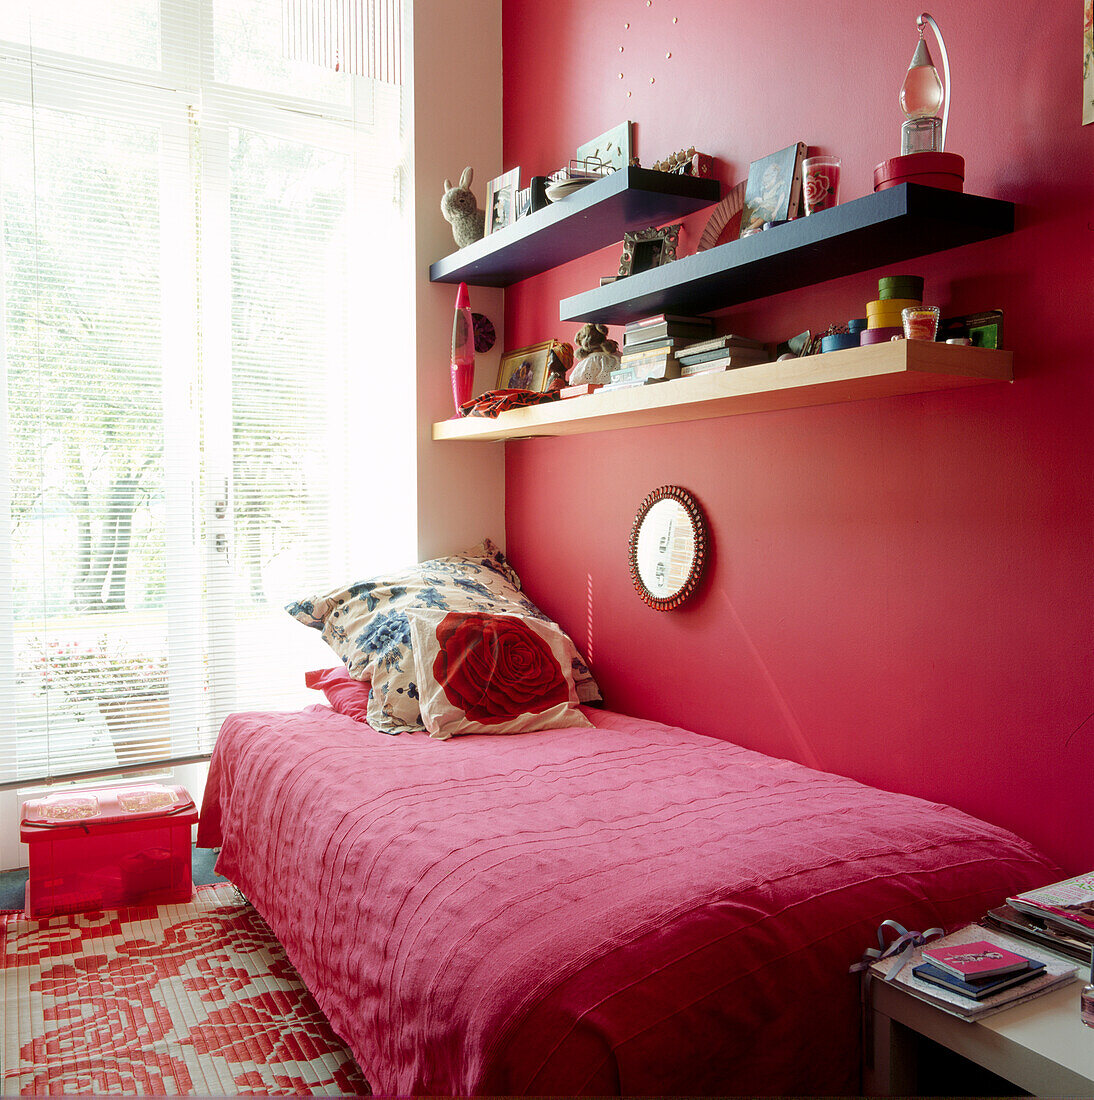 Close up of red single bedroom for teenager with casement window